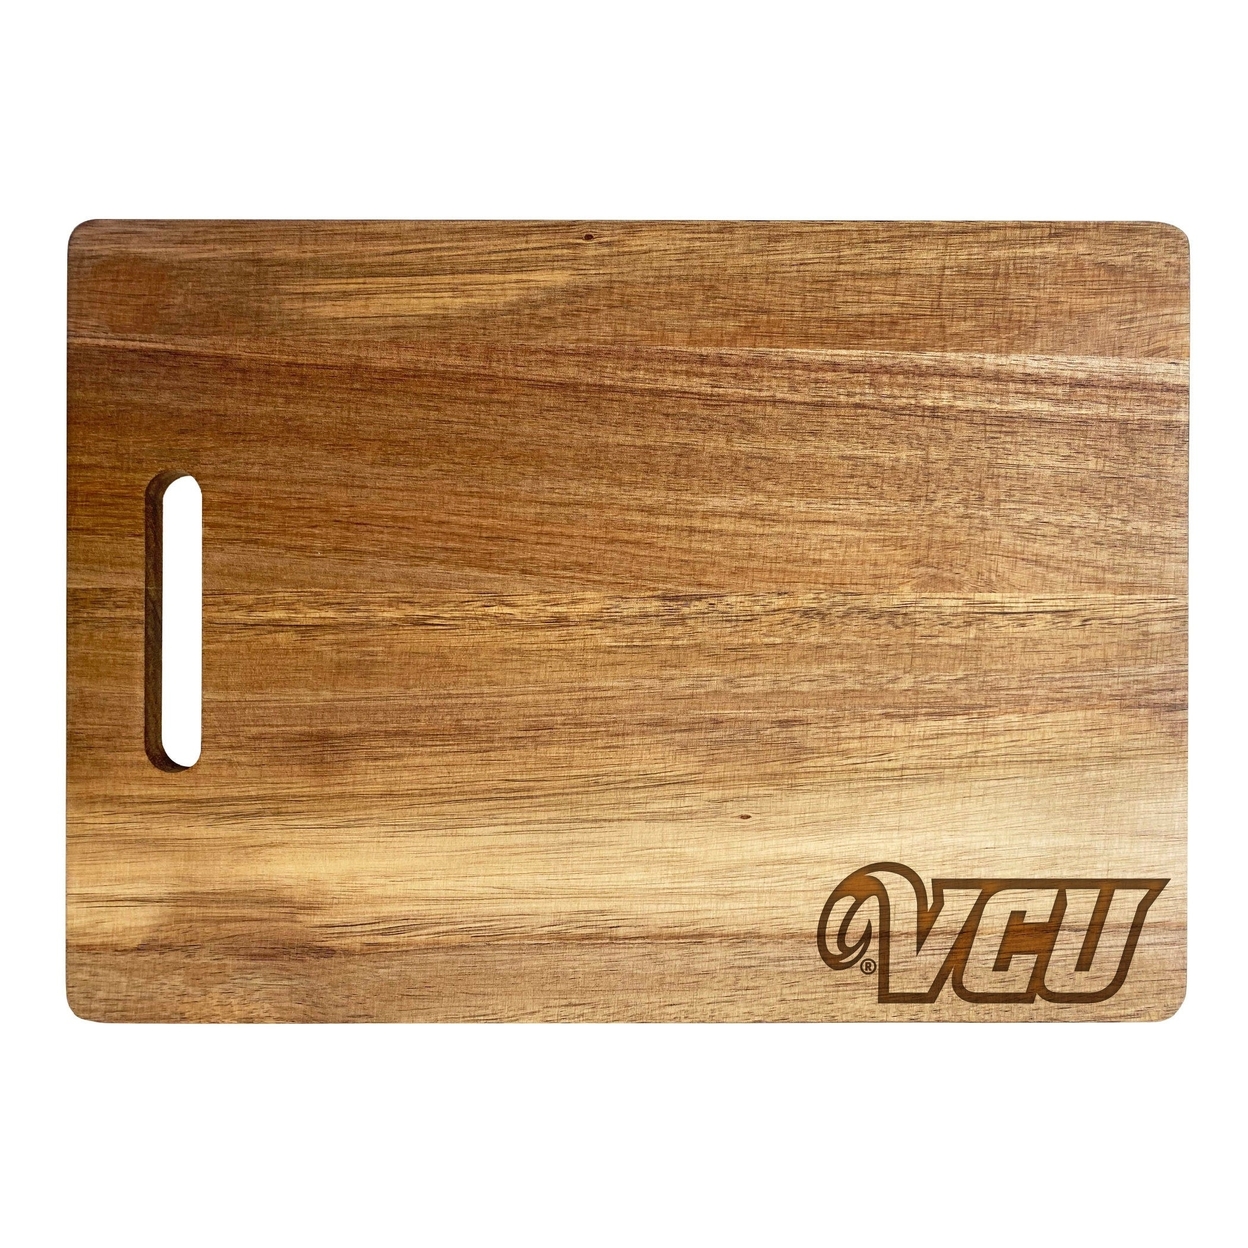 Virginia Commonwealth Engraved Wooden Cutting Board 10 X 14 Acacia Wood - Small Engraving